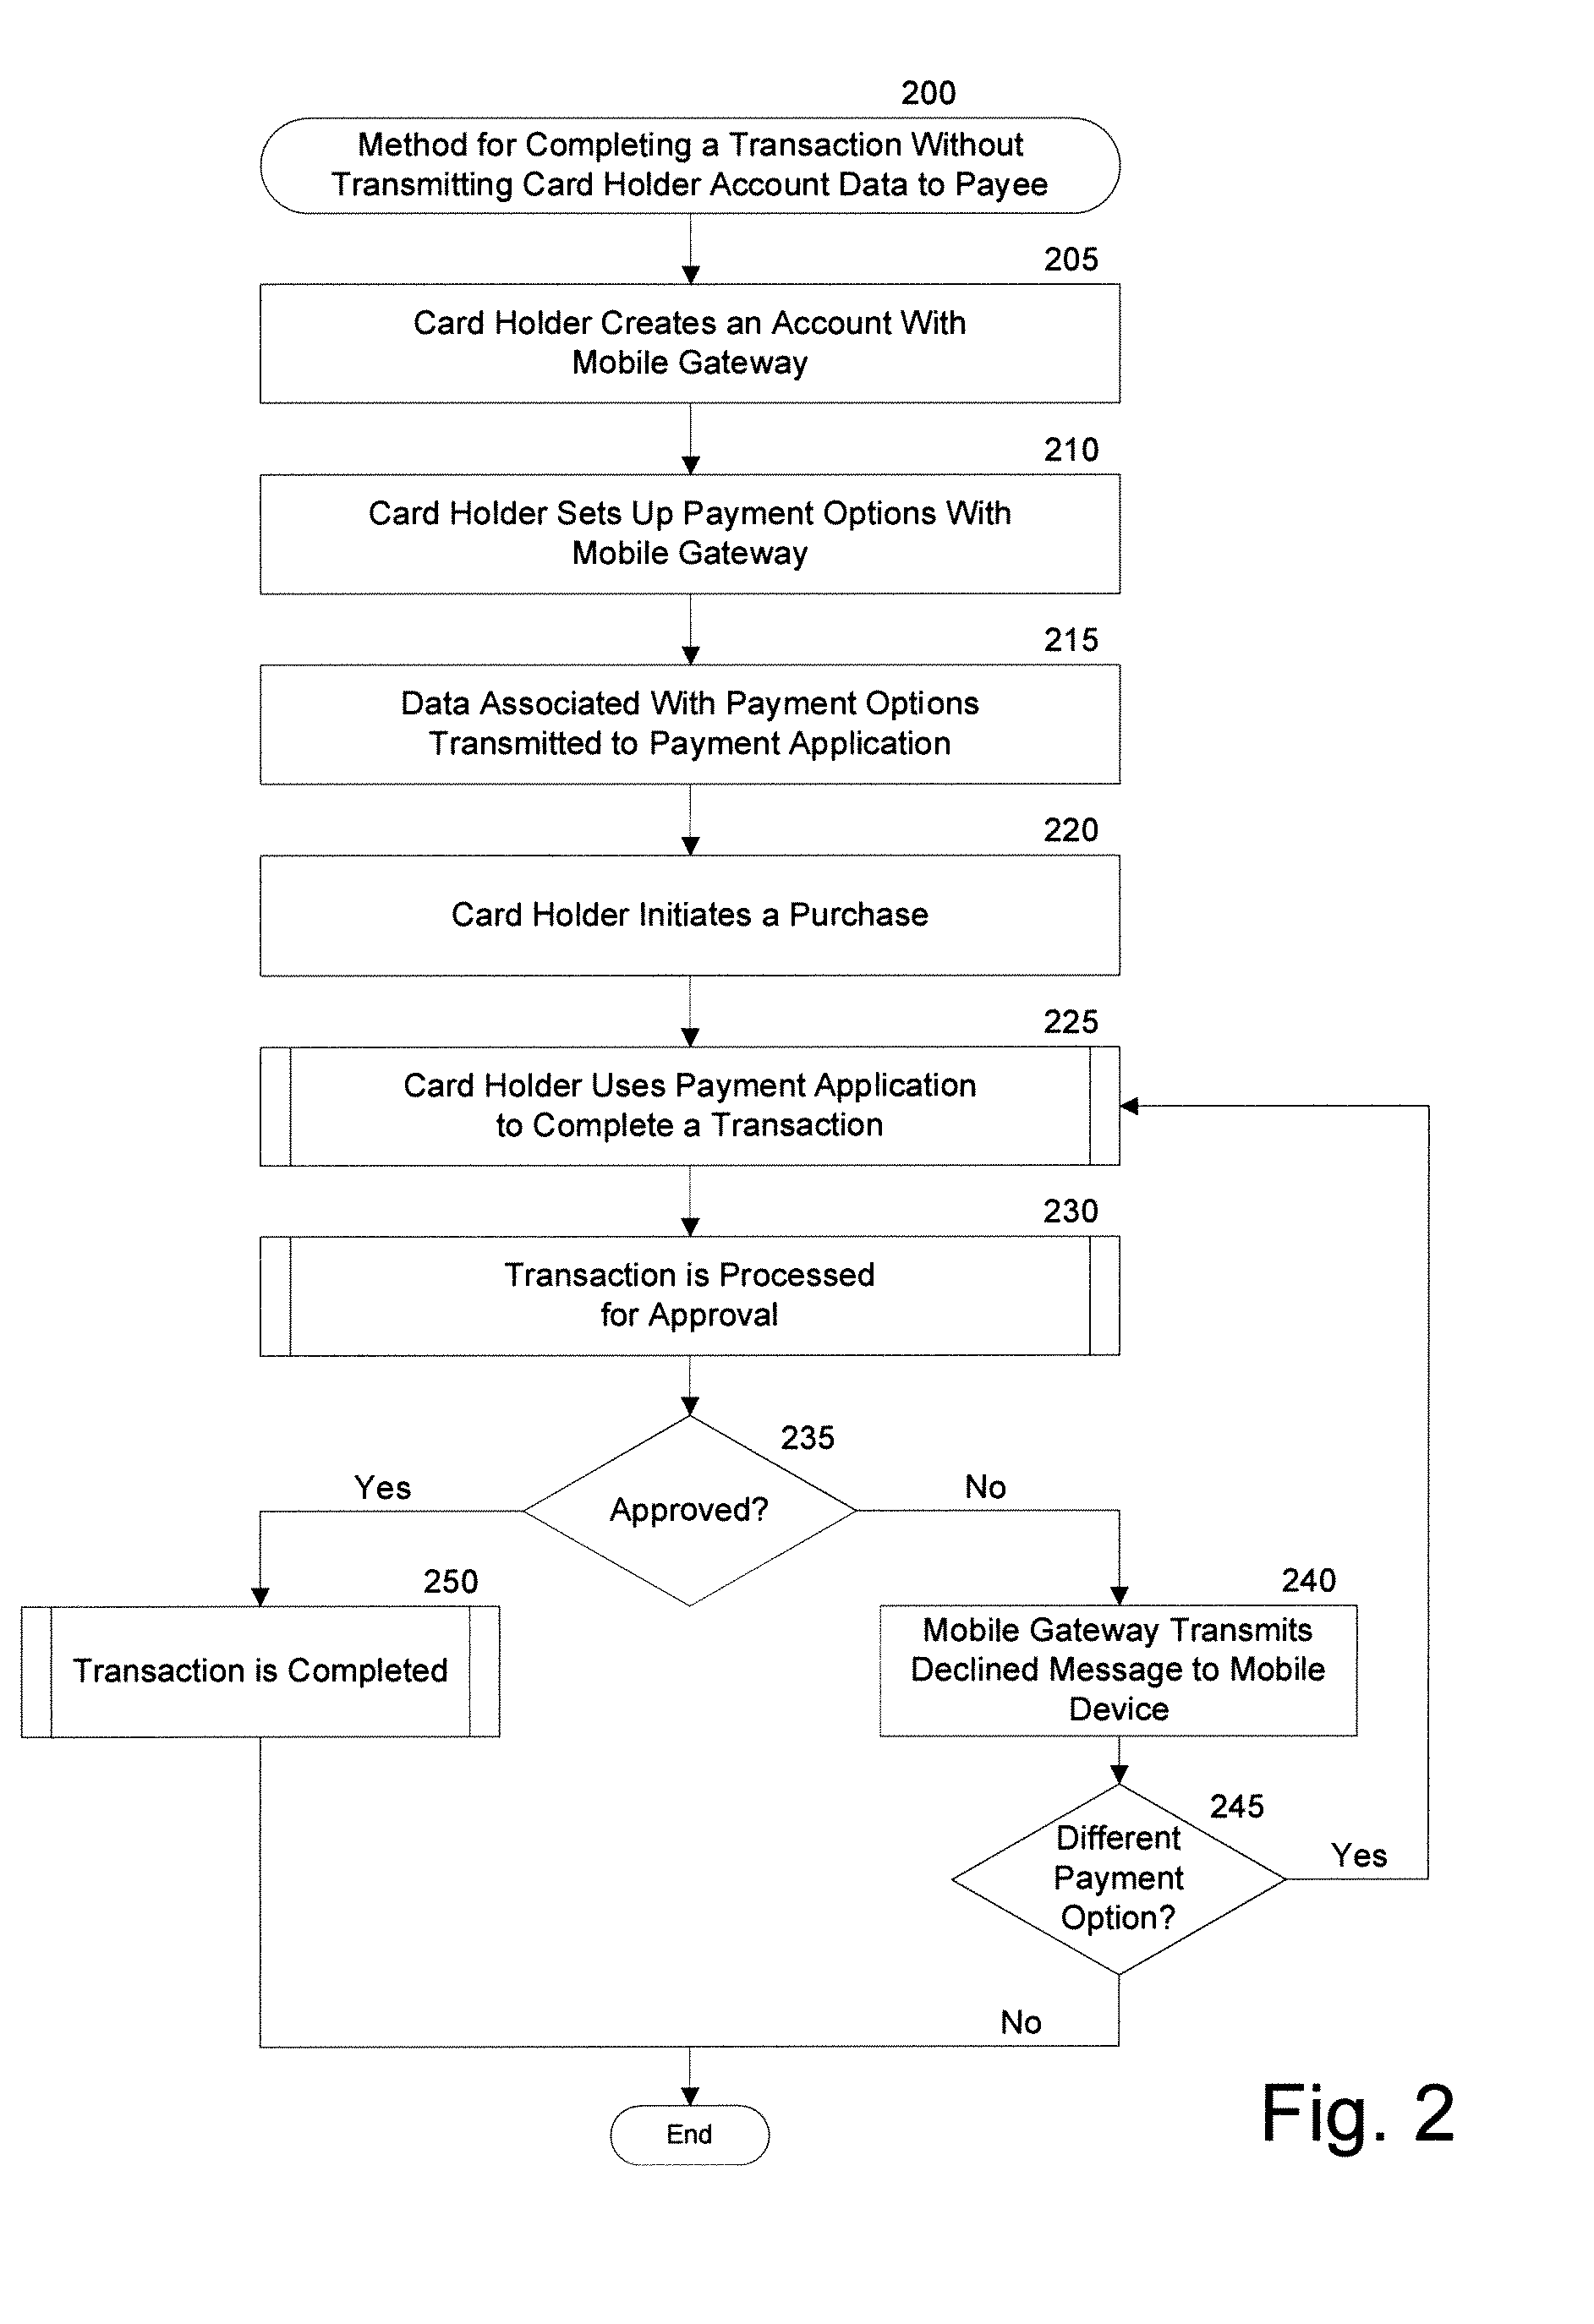 System And Method For Processing Transactions Without Providing Account Information To A Payee